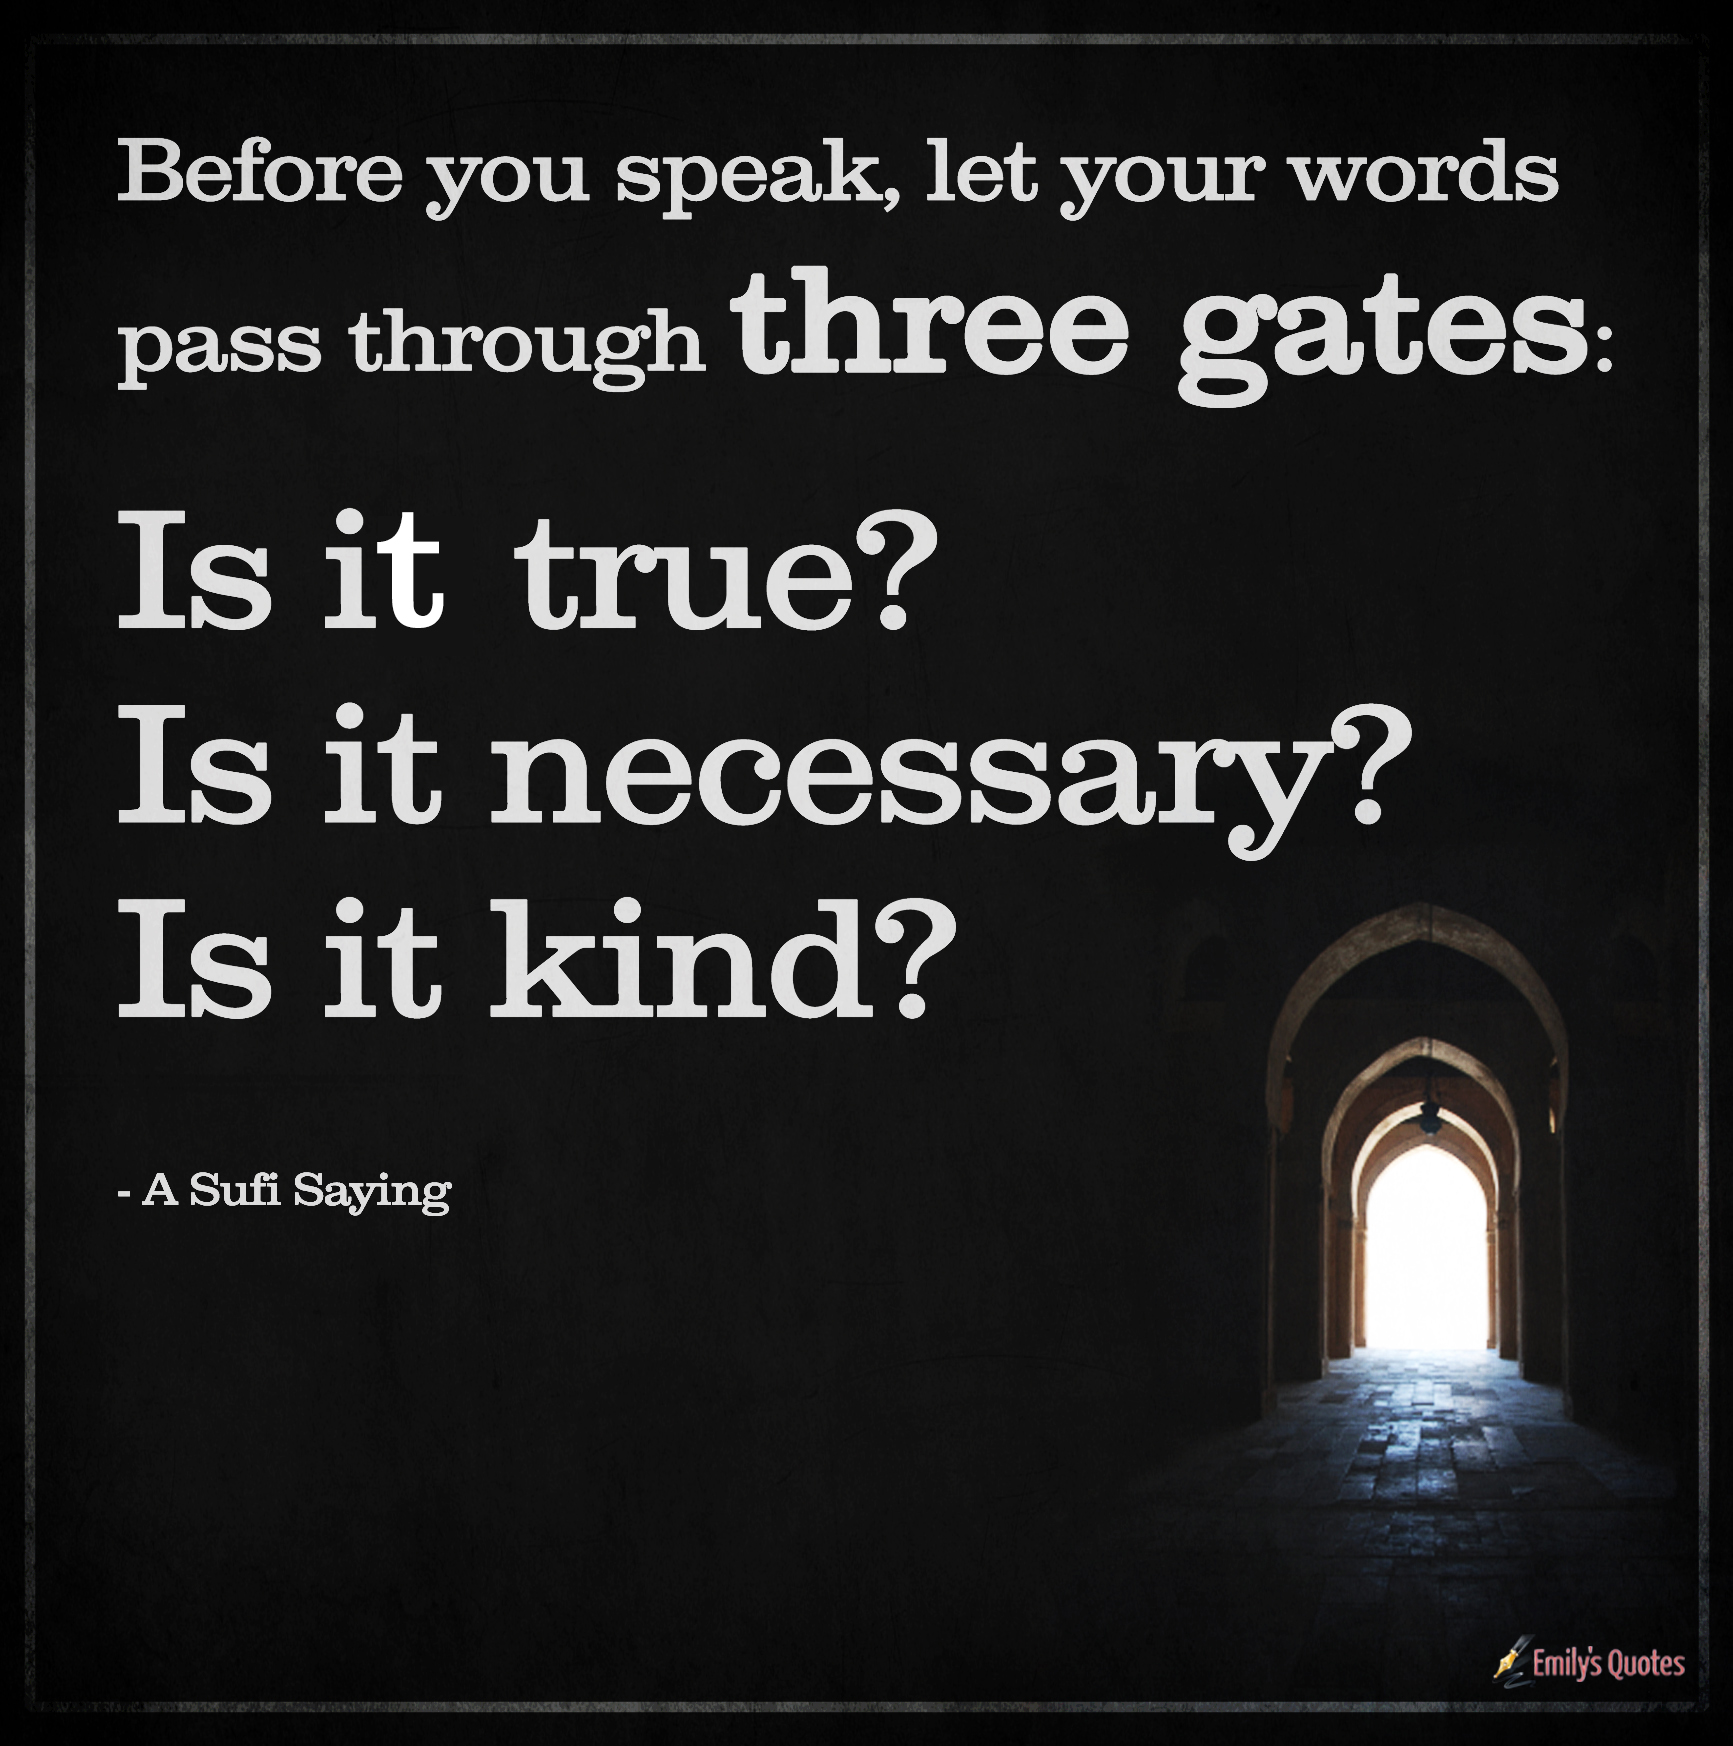 Before you speak, let your words pass through three gates